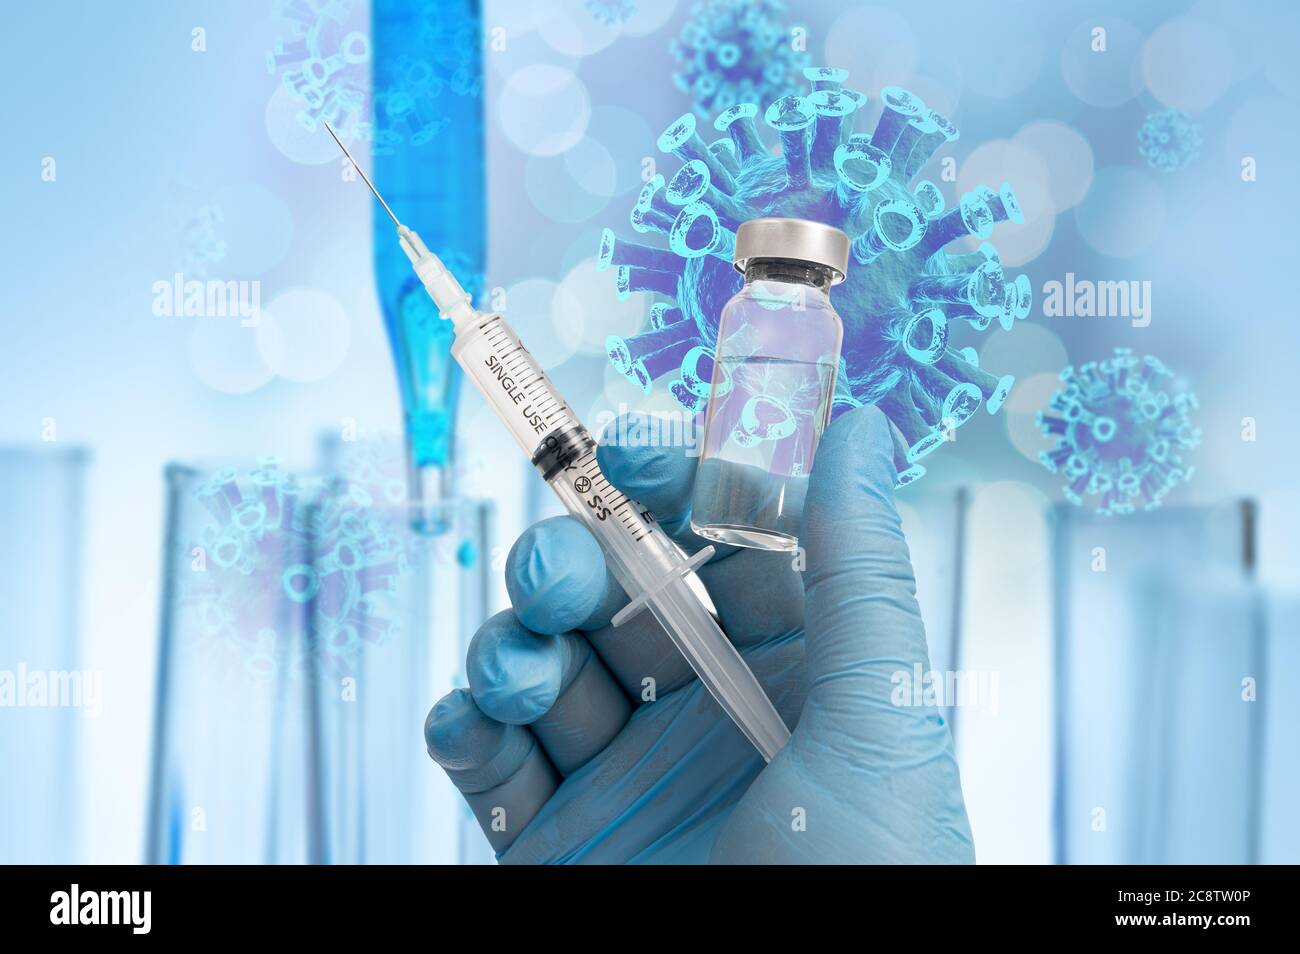 The scientist's hand holding the Covid-19 vaccine with blue gloves in the background of the biotechnology concept. Stock Photo